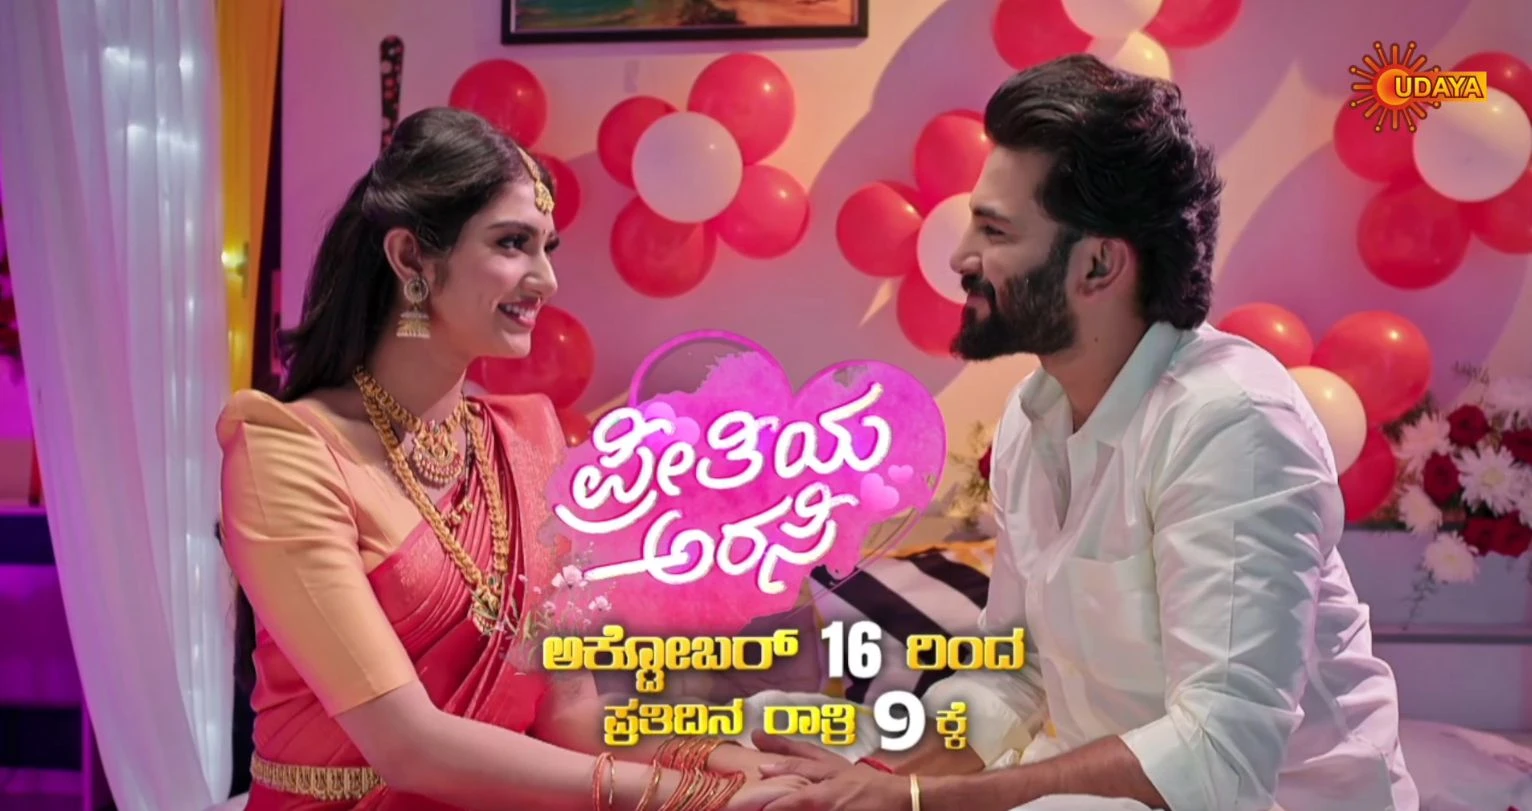 Deepavali Special Episodes on Udaya TV - Airing Monday to Friday 6